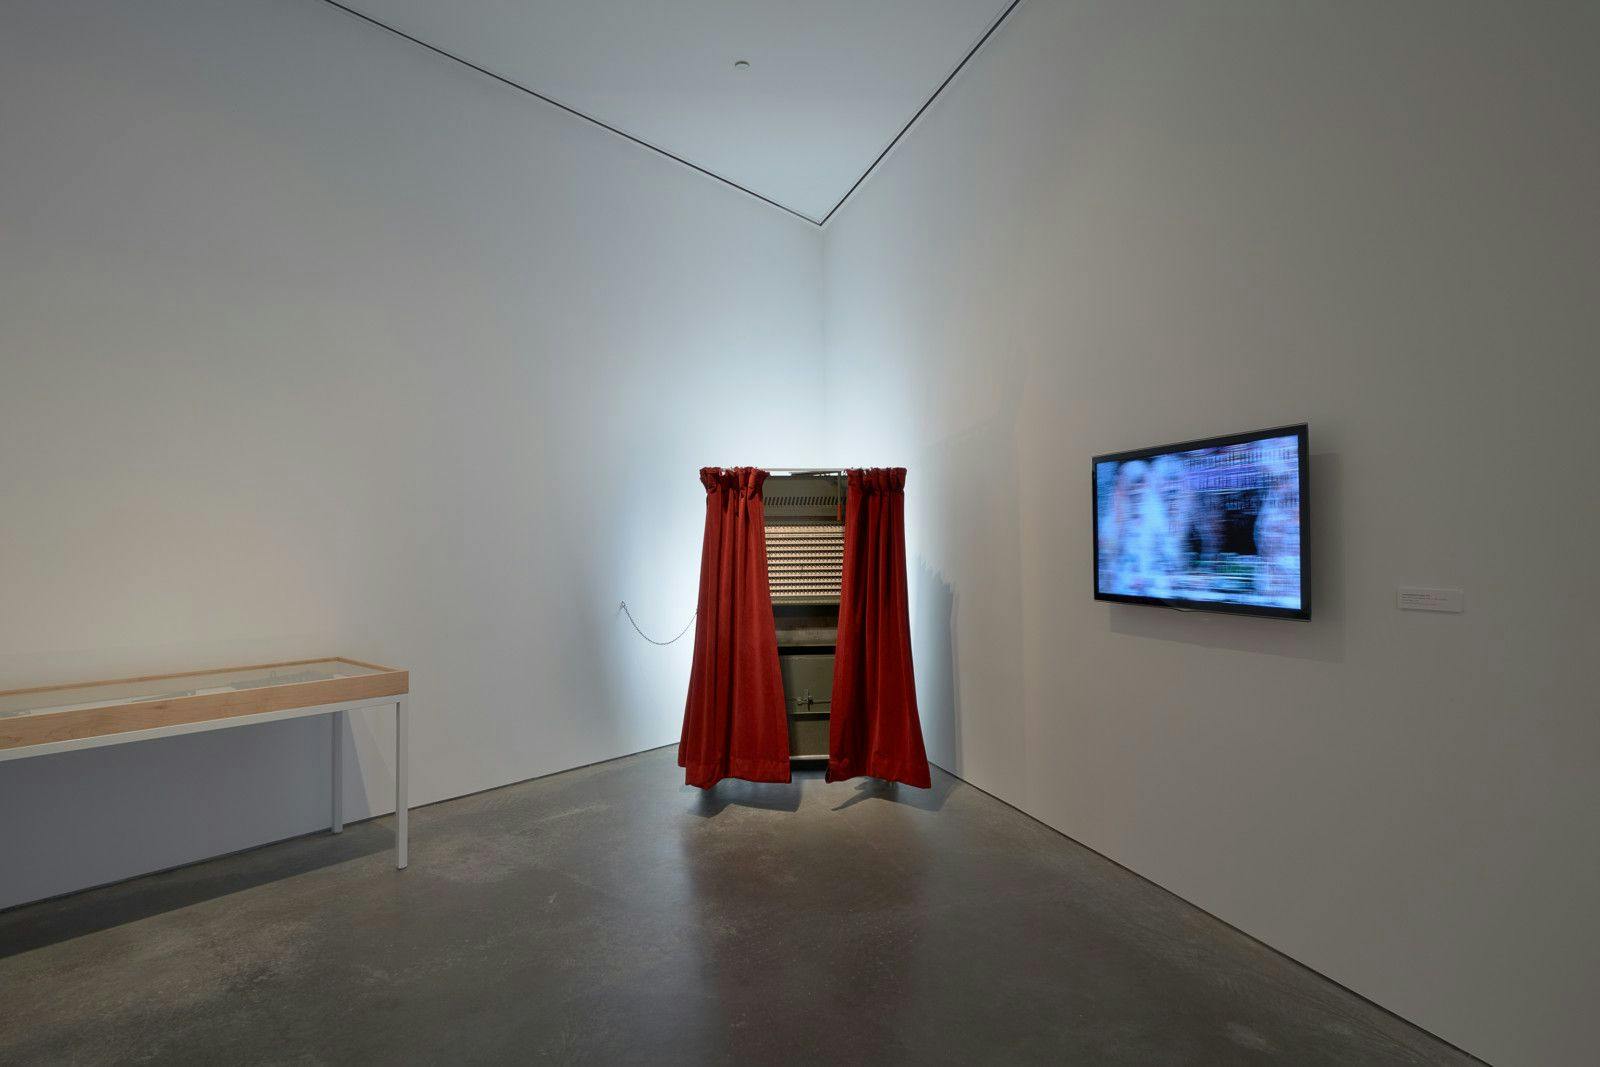 R. Luke DuBois, A More Perfect Union Exhibition Installation View, photo by Eric Swanson